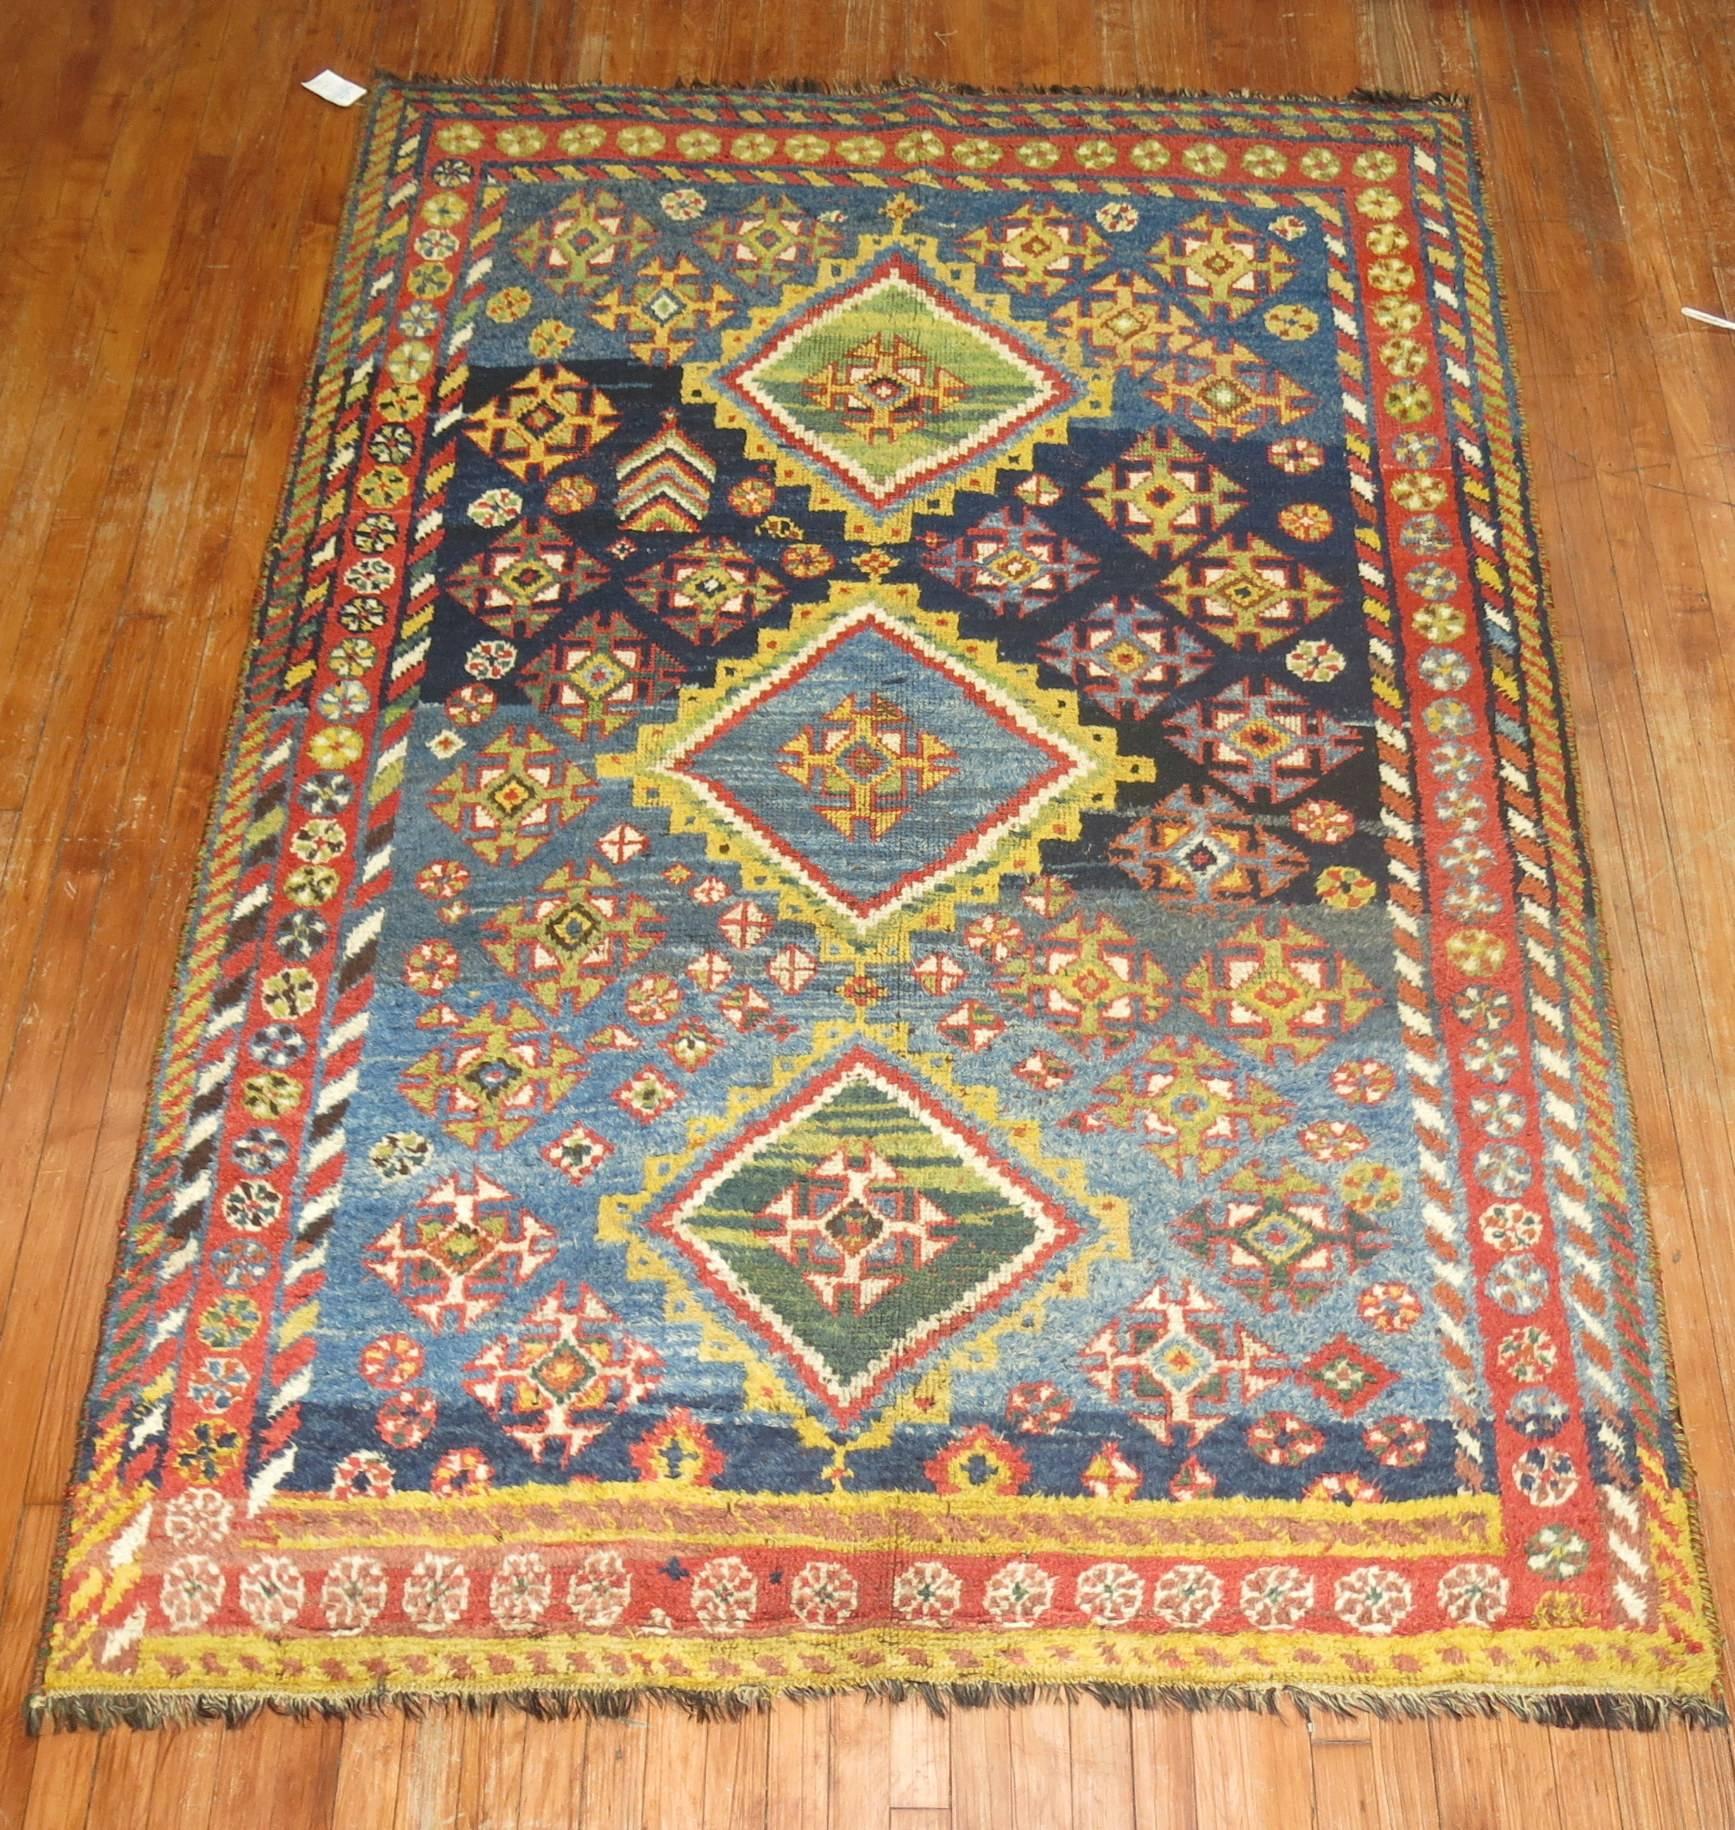 A colorful one of a kind antique Persian Gabbeh rug from the 2nd quarter of the 20th century.

Measures: 5'5'' x 7'7''.

Persian Gabbeh rugs are made with extra high pile and very simple, graphic designs focused on the use of color, which tend